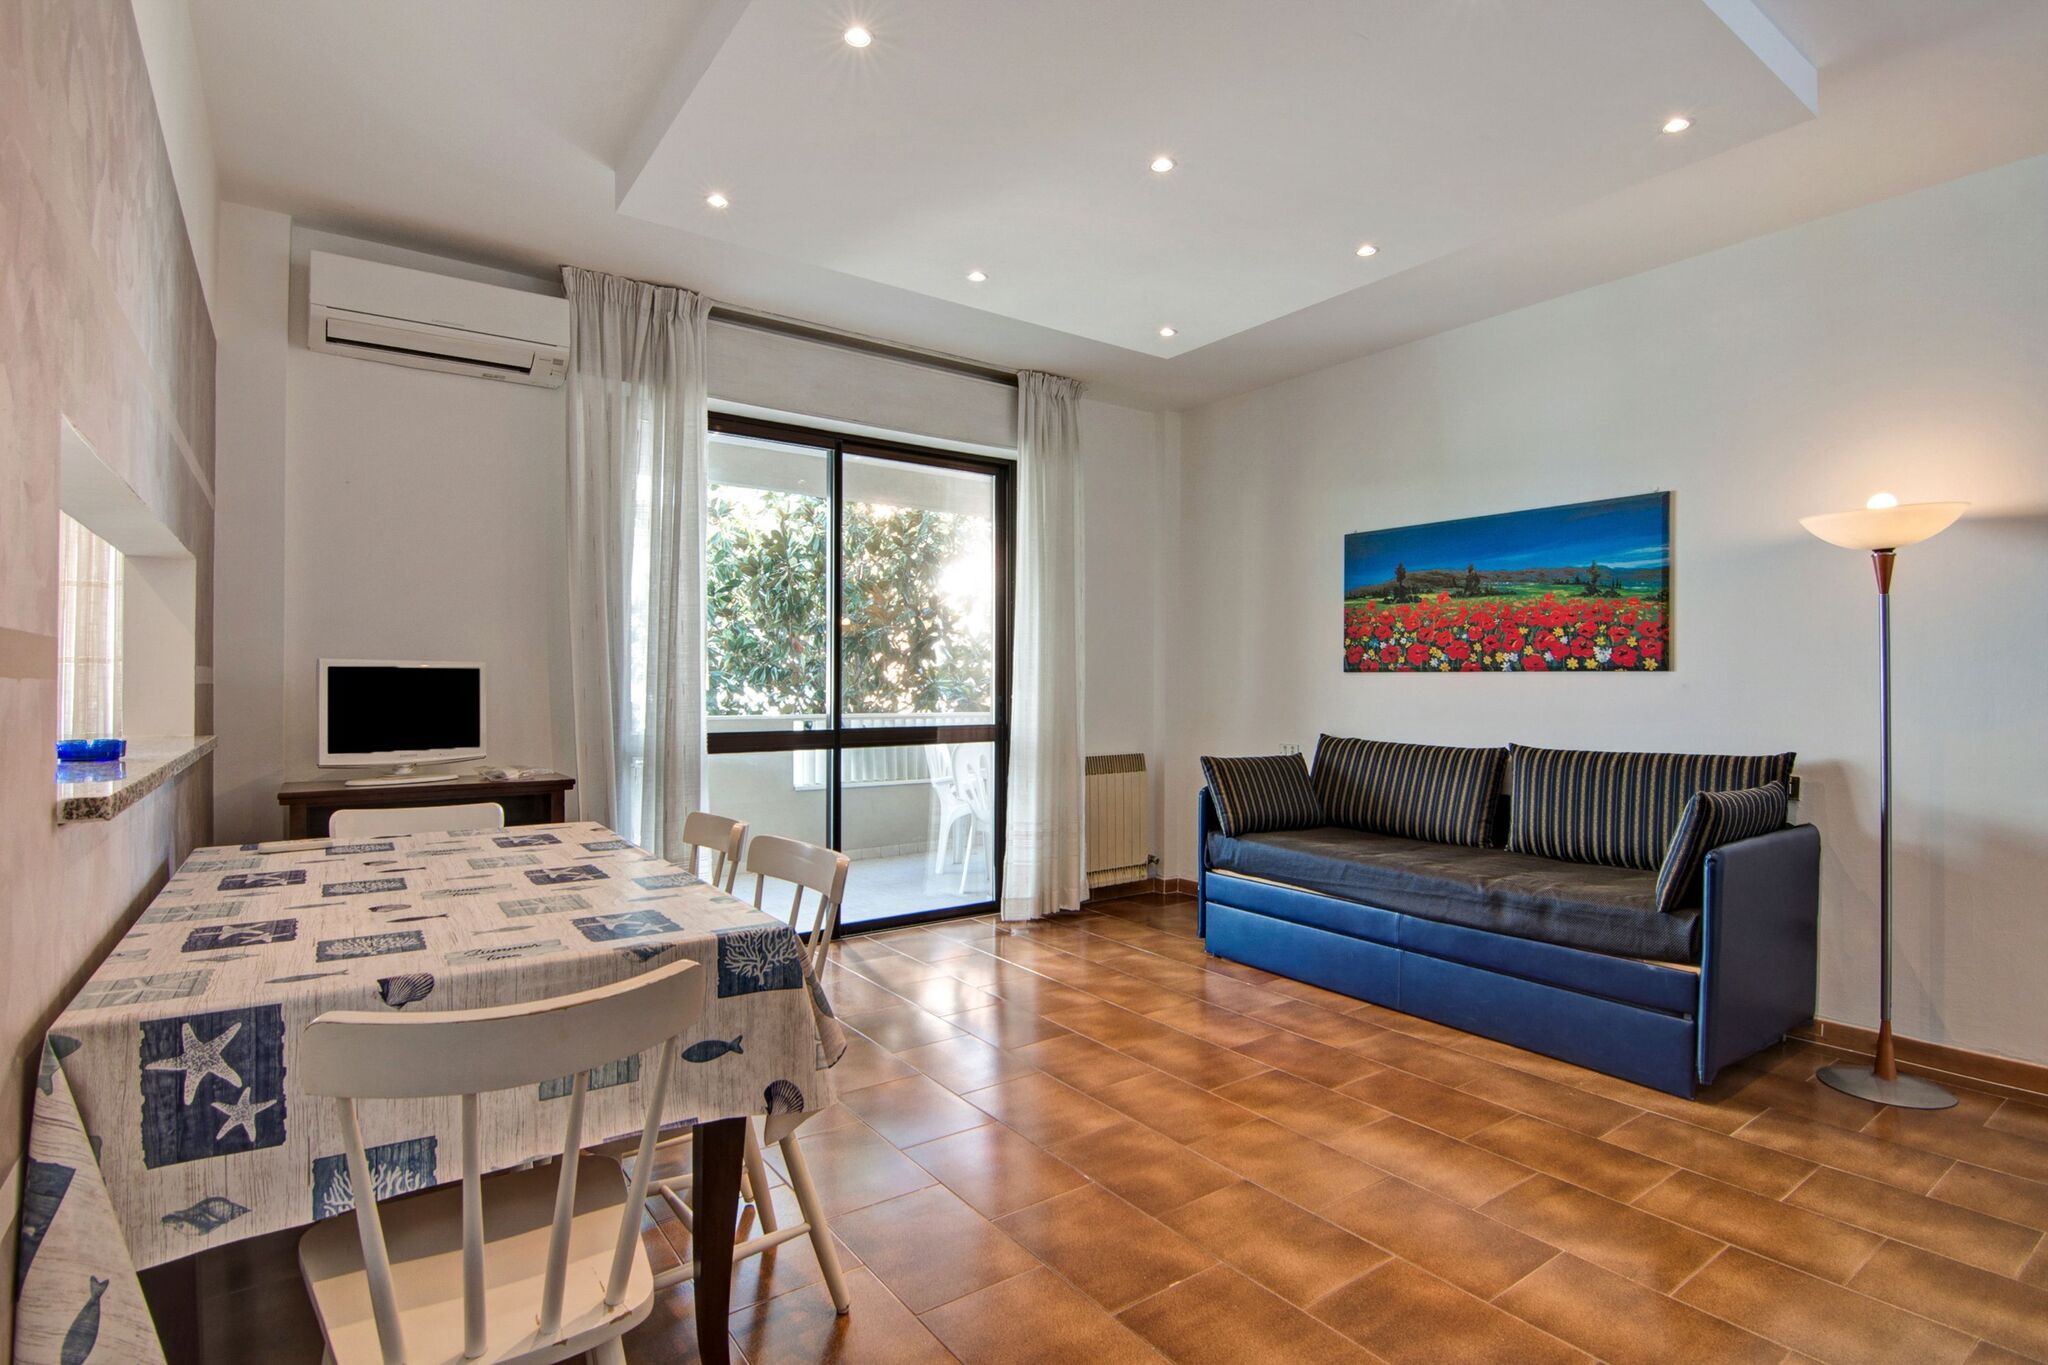 Apartment in northern zone of Riccione, 150 meters from the sea.